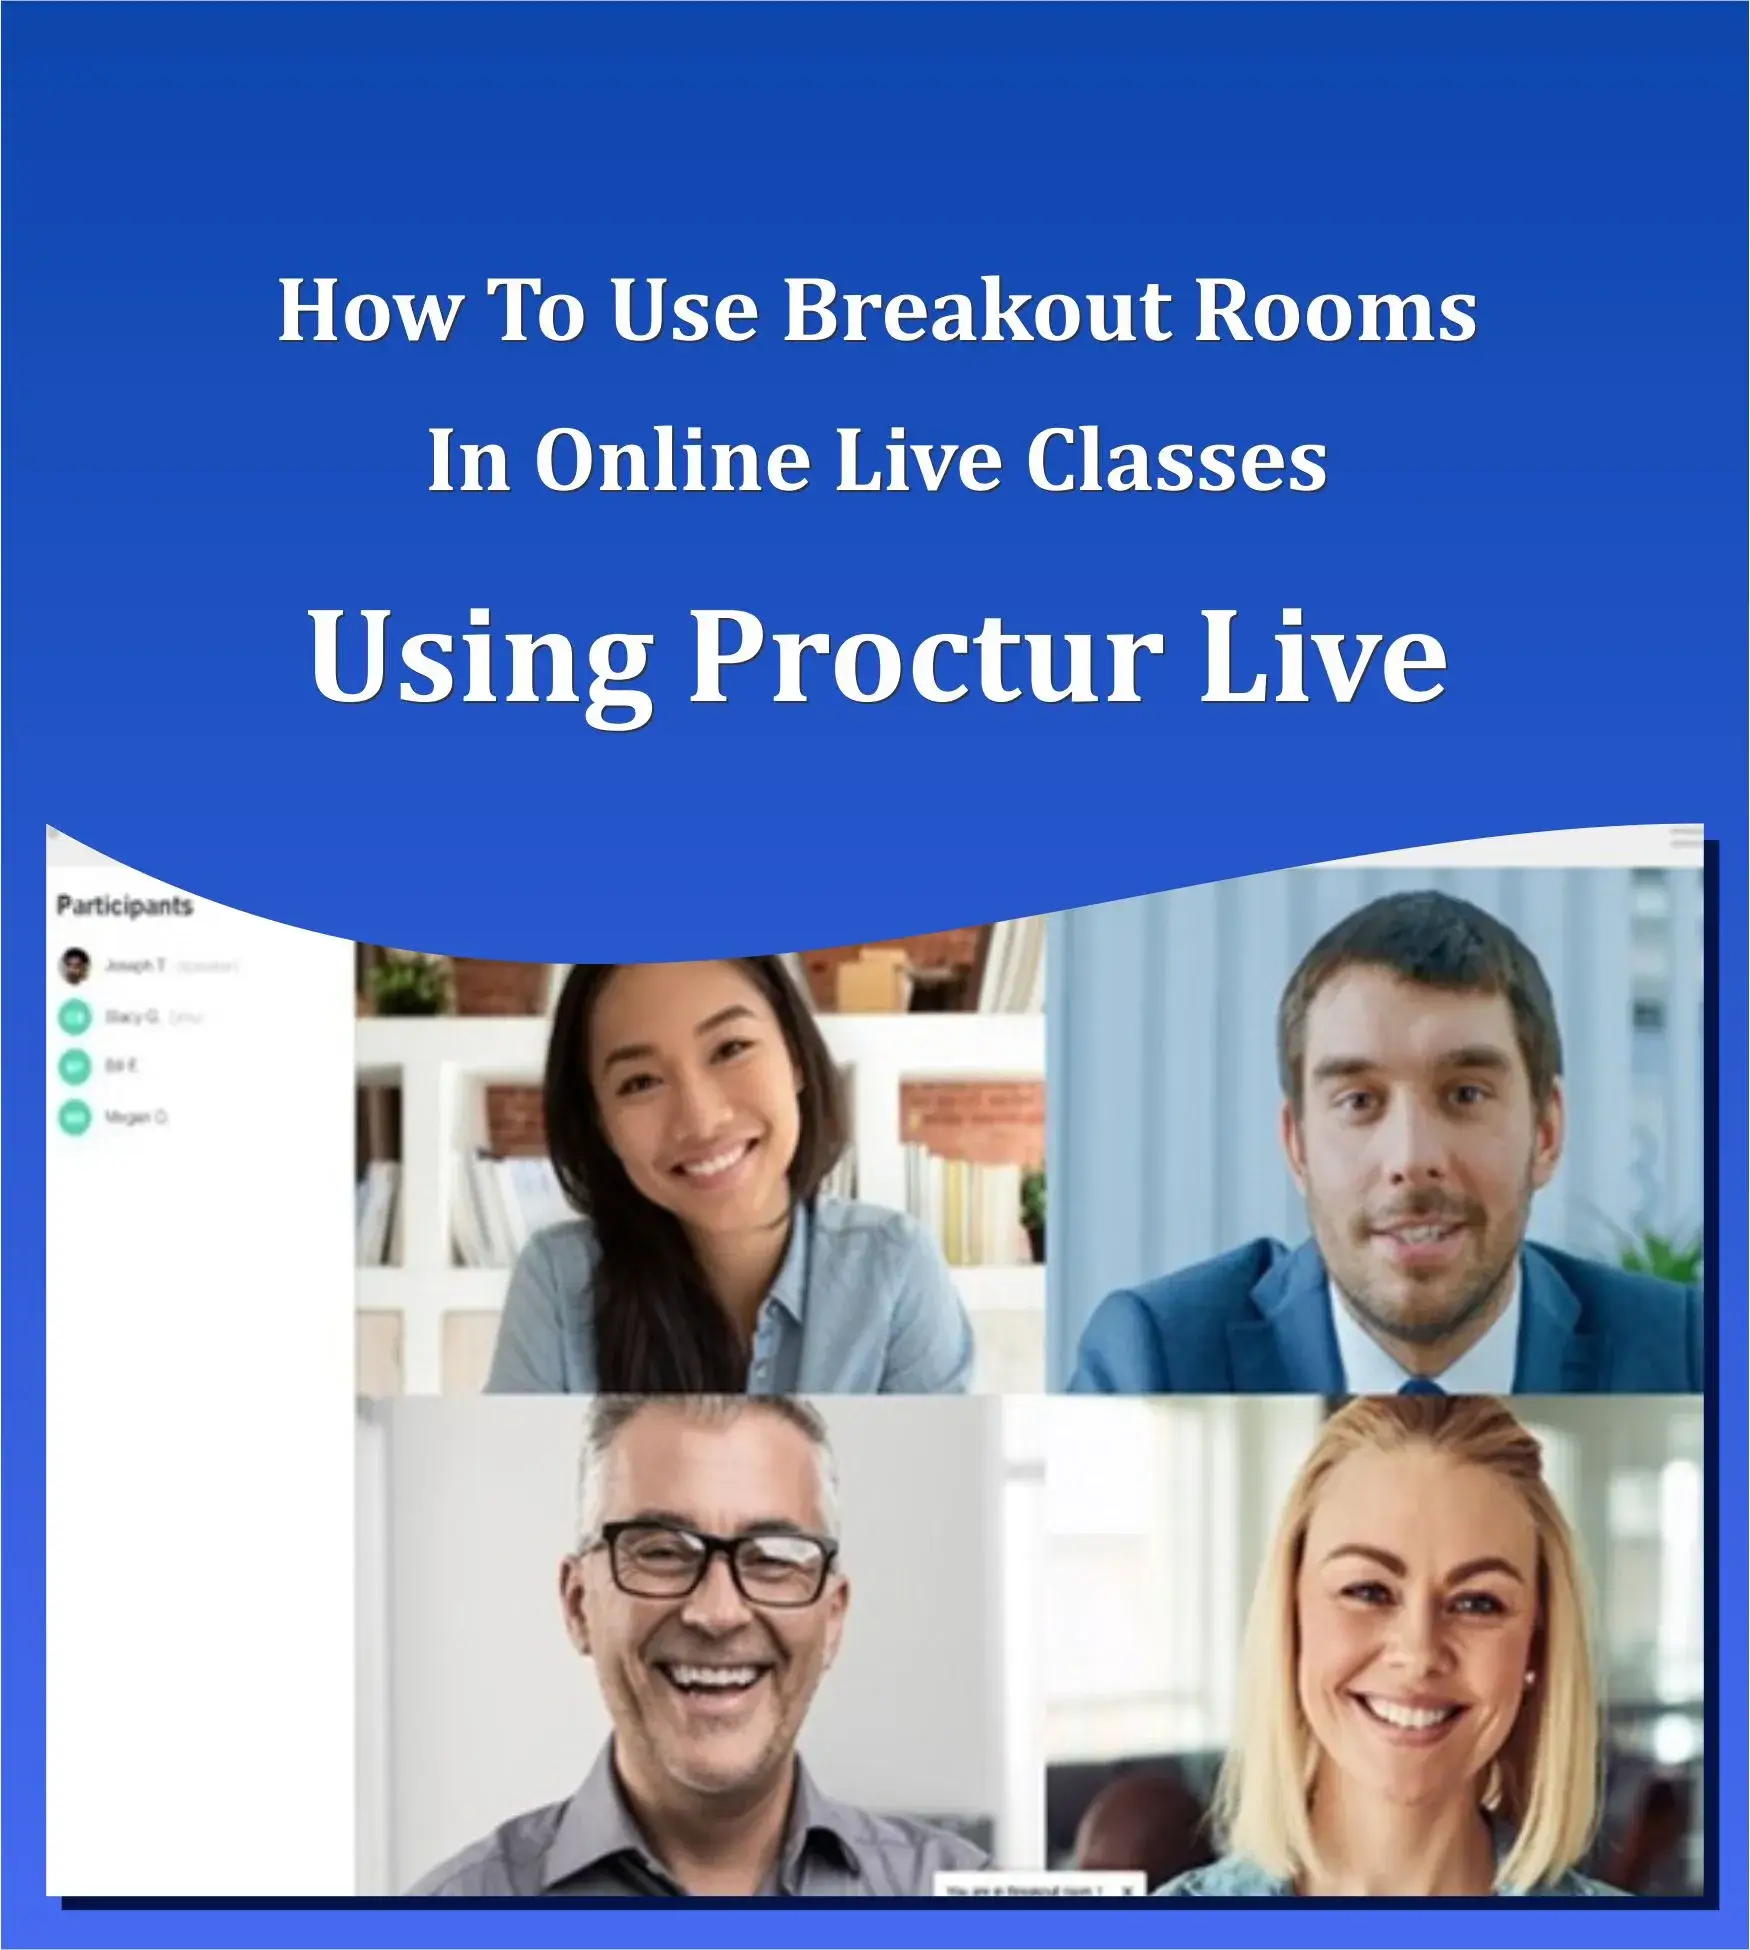 Online-Live-Classes-are-used-by-Breakout-Room | Proctur-Live